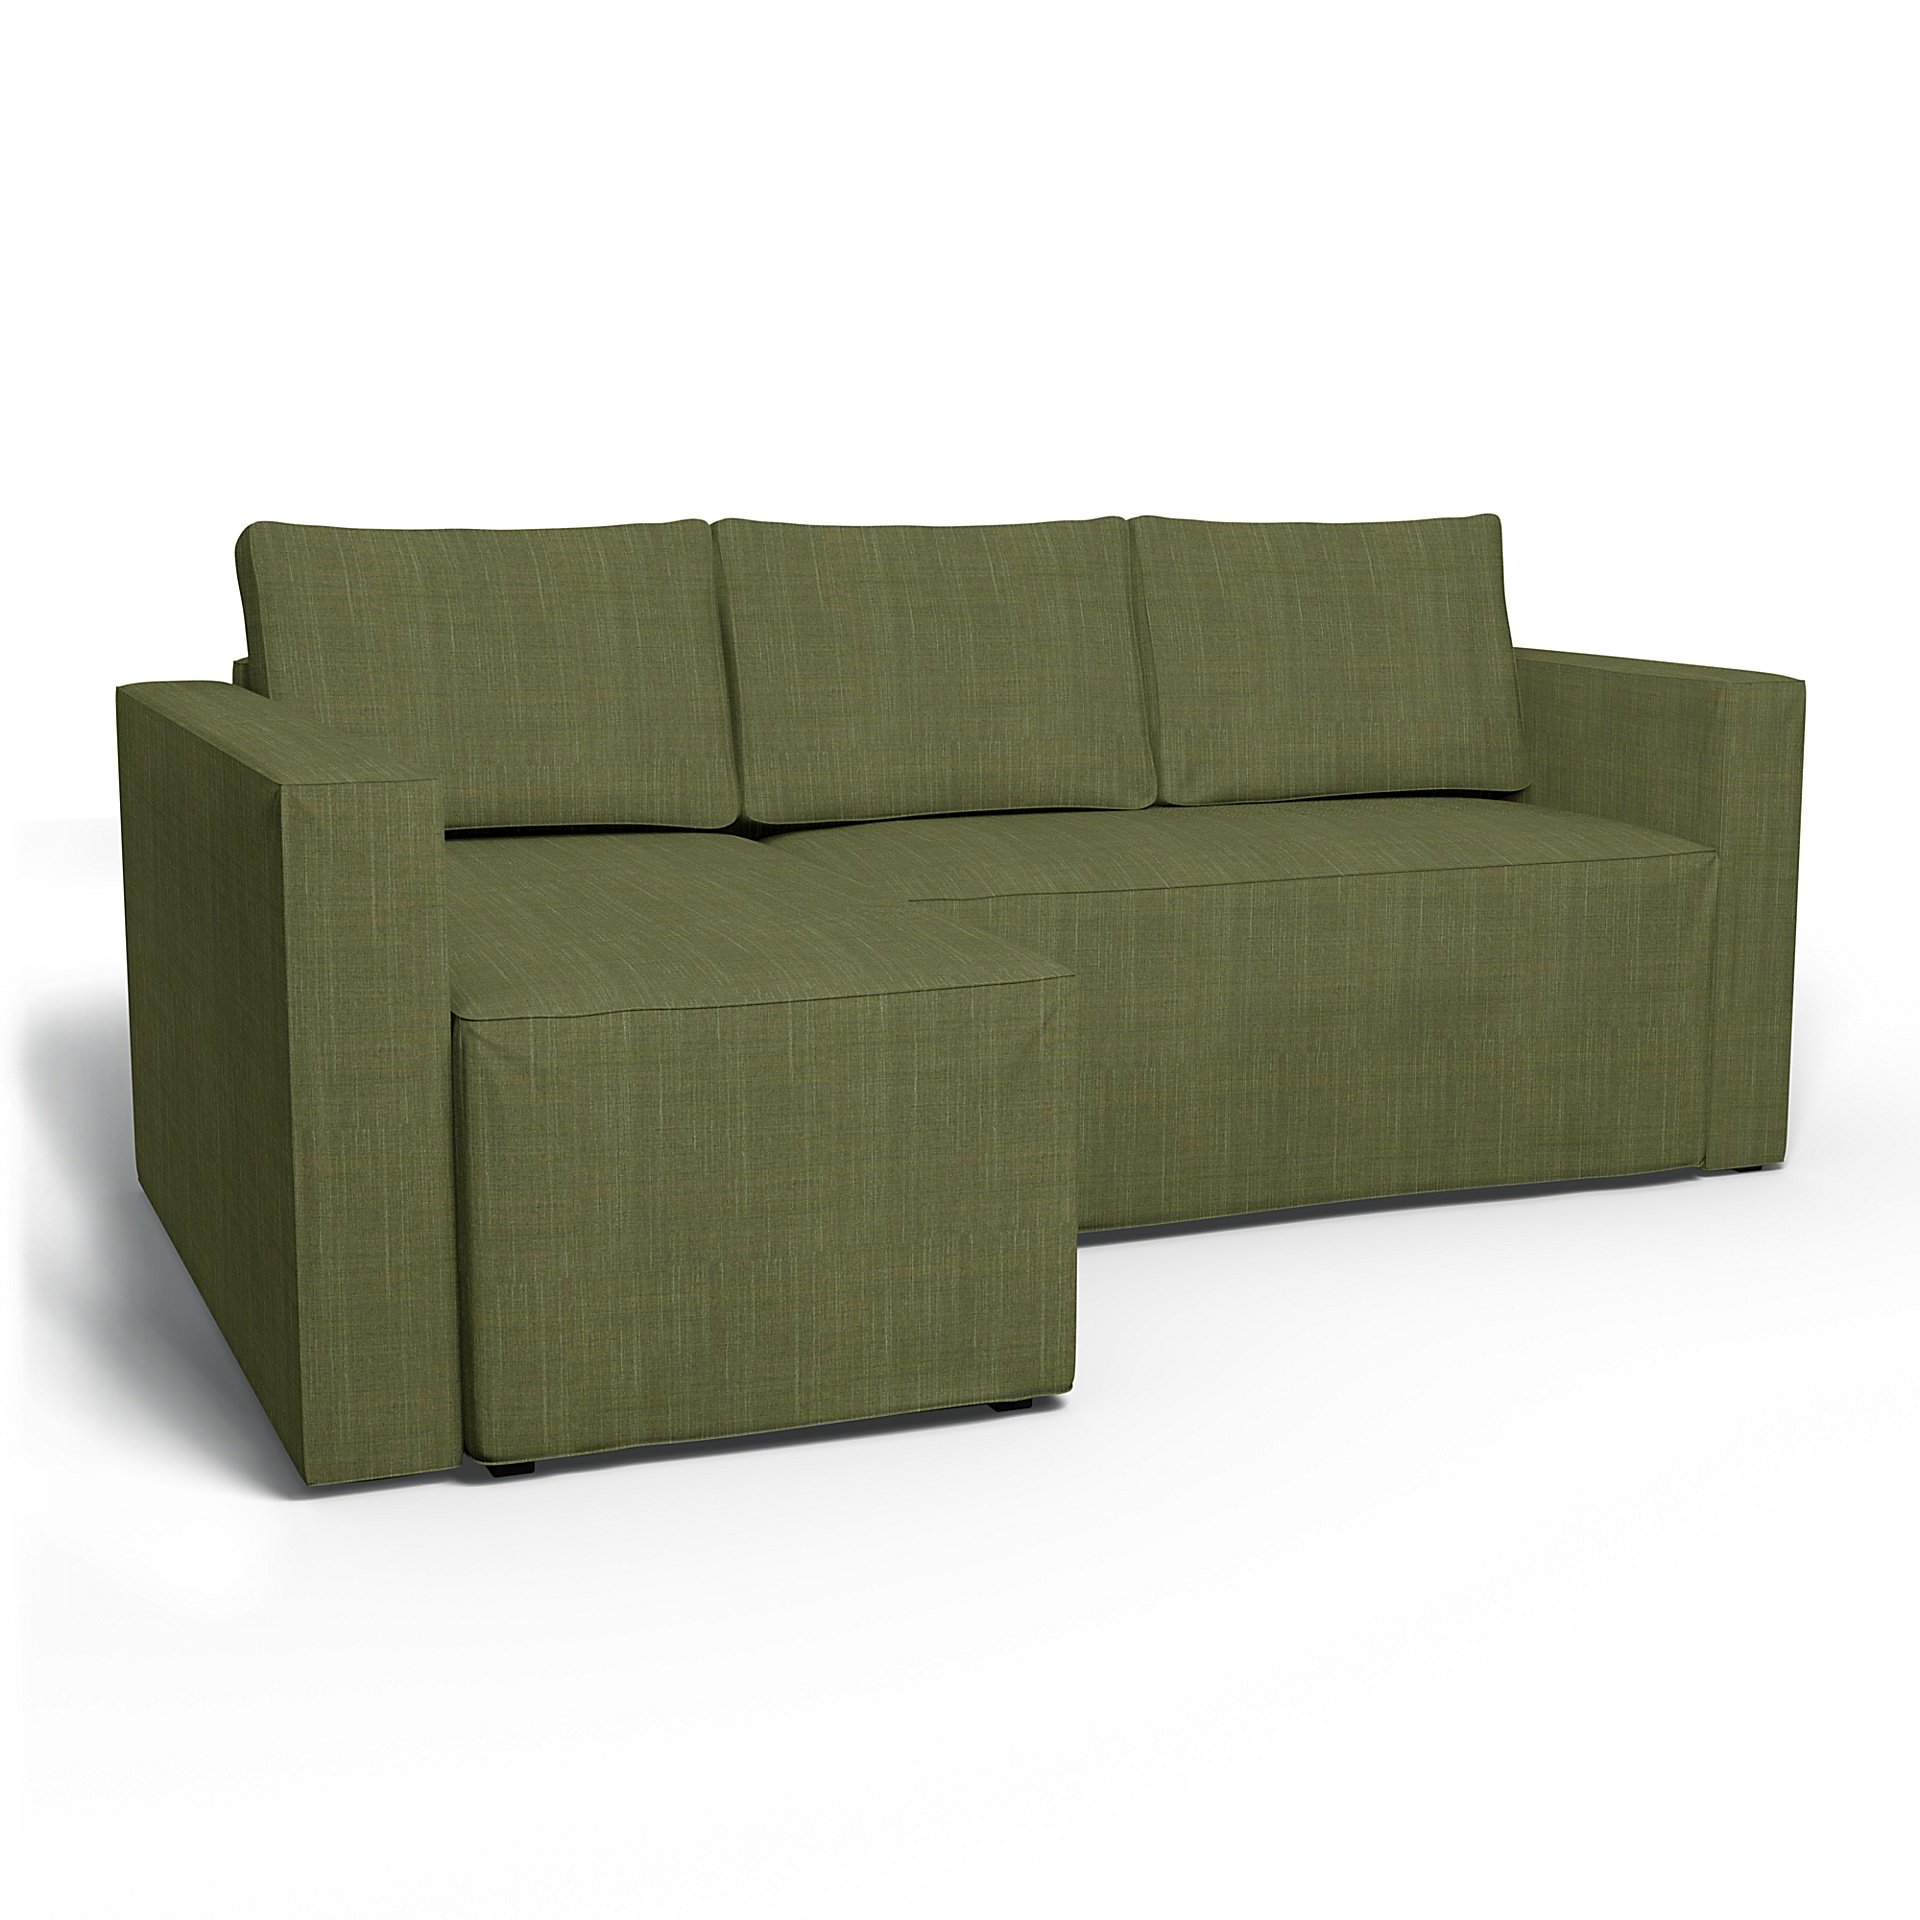 IKEA - Manstad Sofa Bed with Left Chaise Cover, Moss Green, Boucle & Texture - Bemz